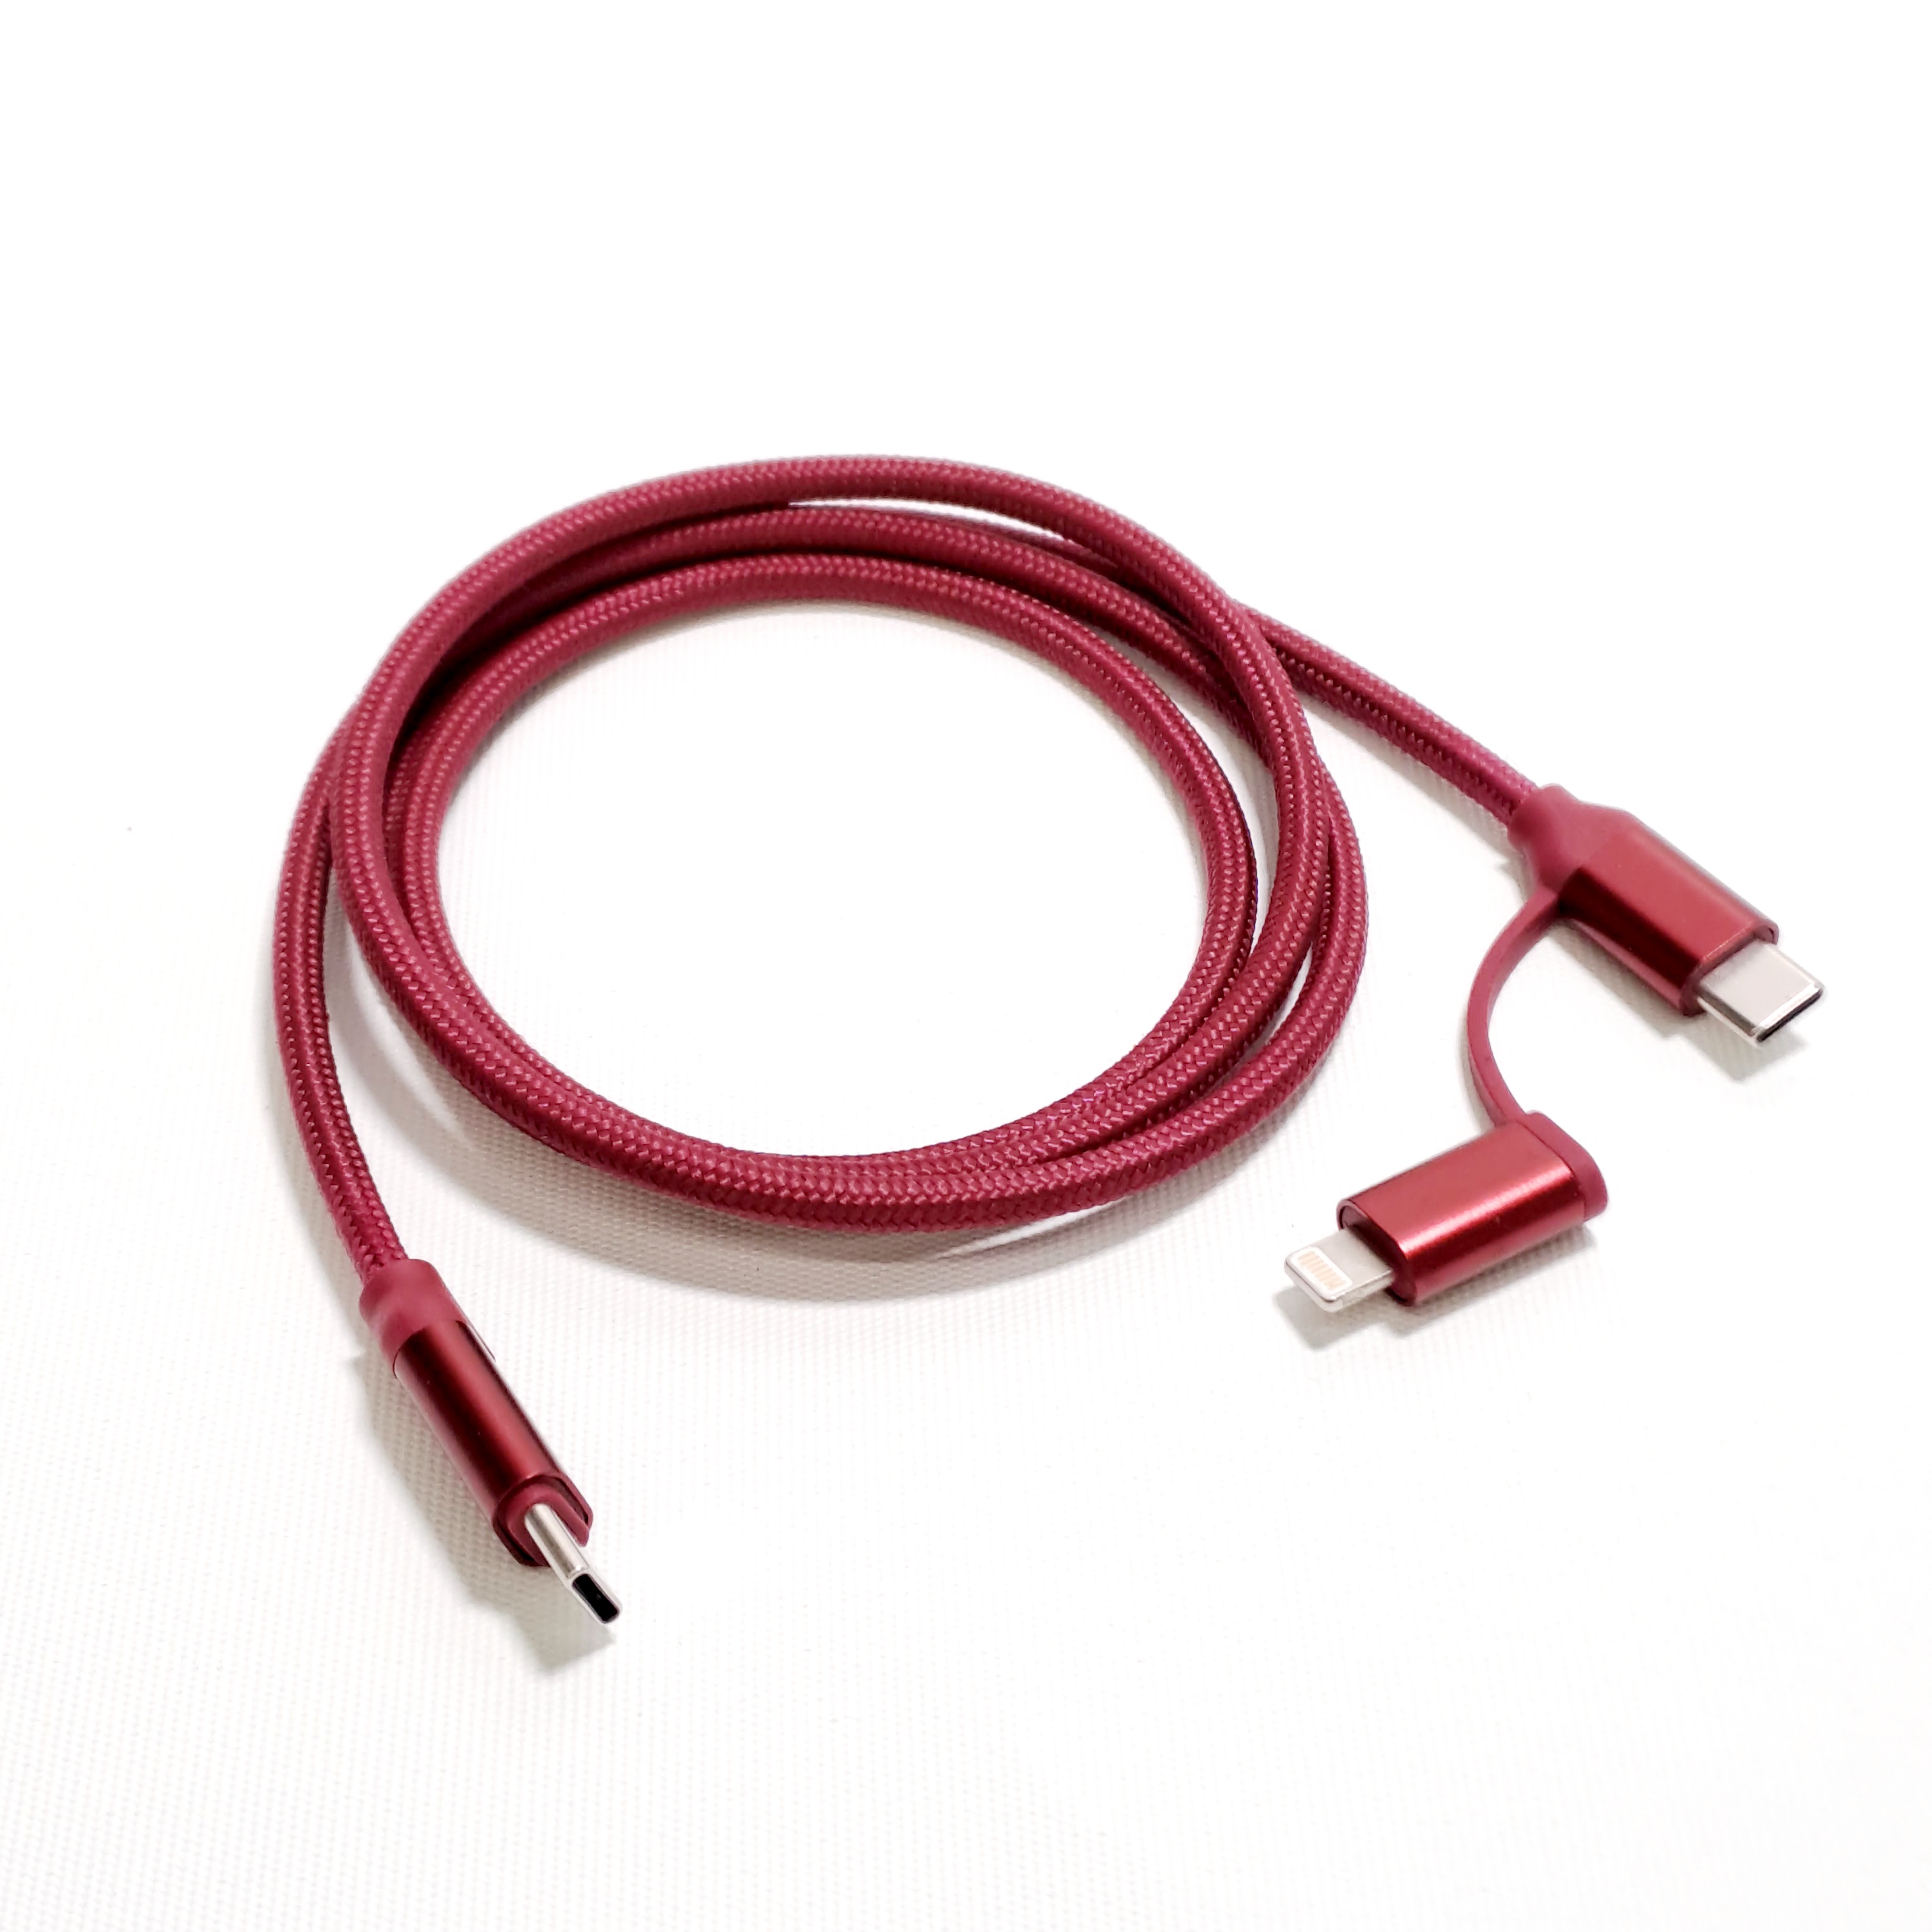 Twins Type C/iPhone to Type C Data & Charging Cable 1m